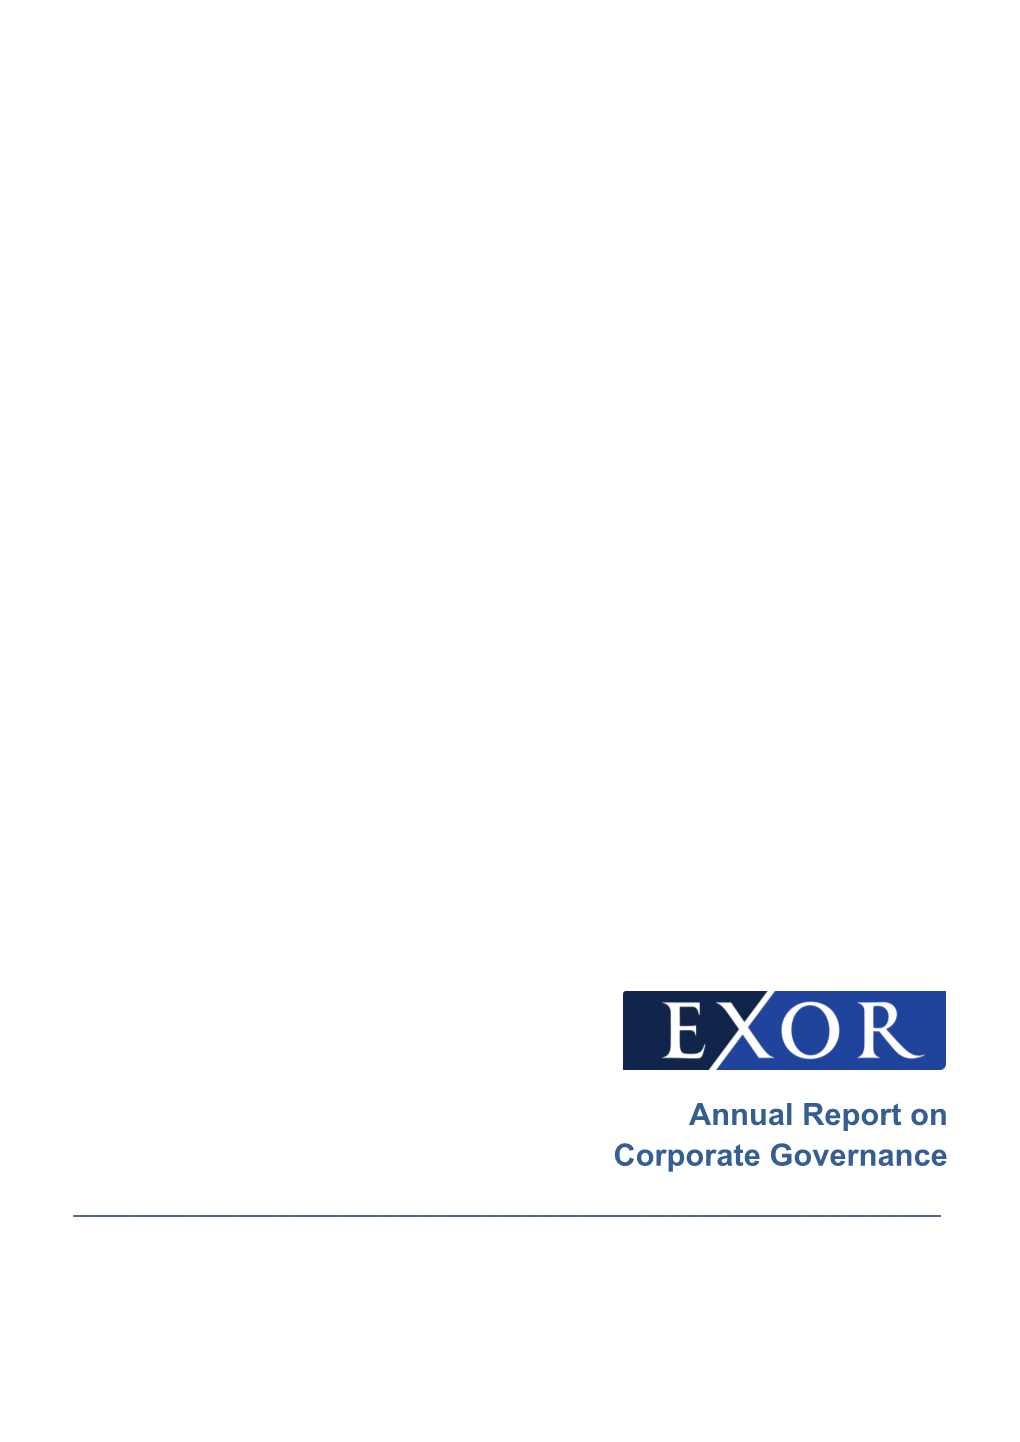 Annual Report on Corporate Governance